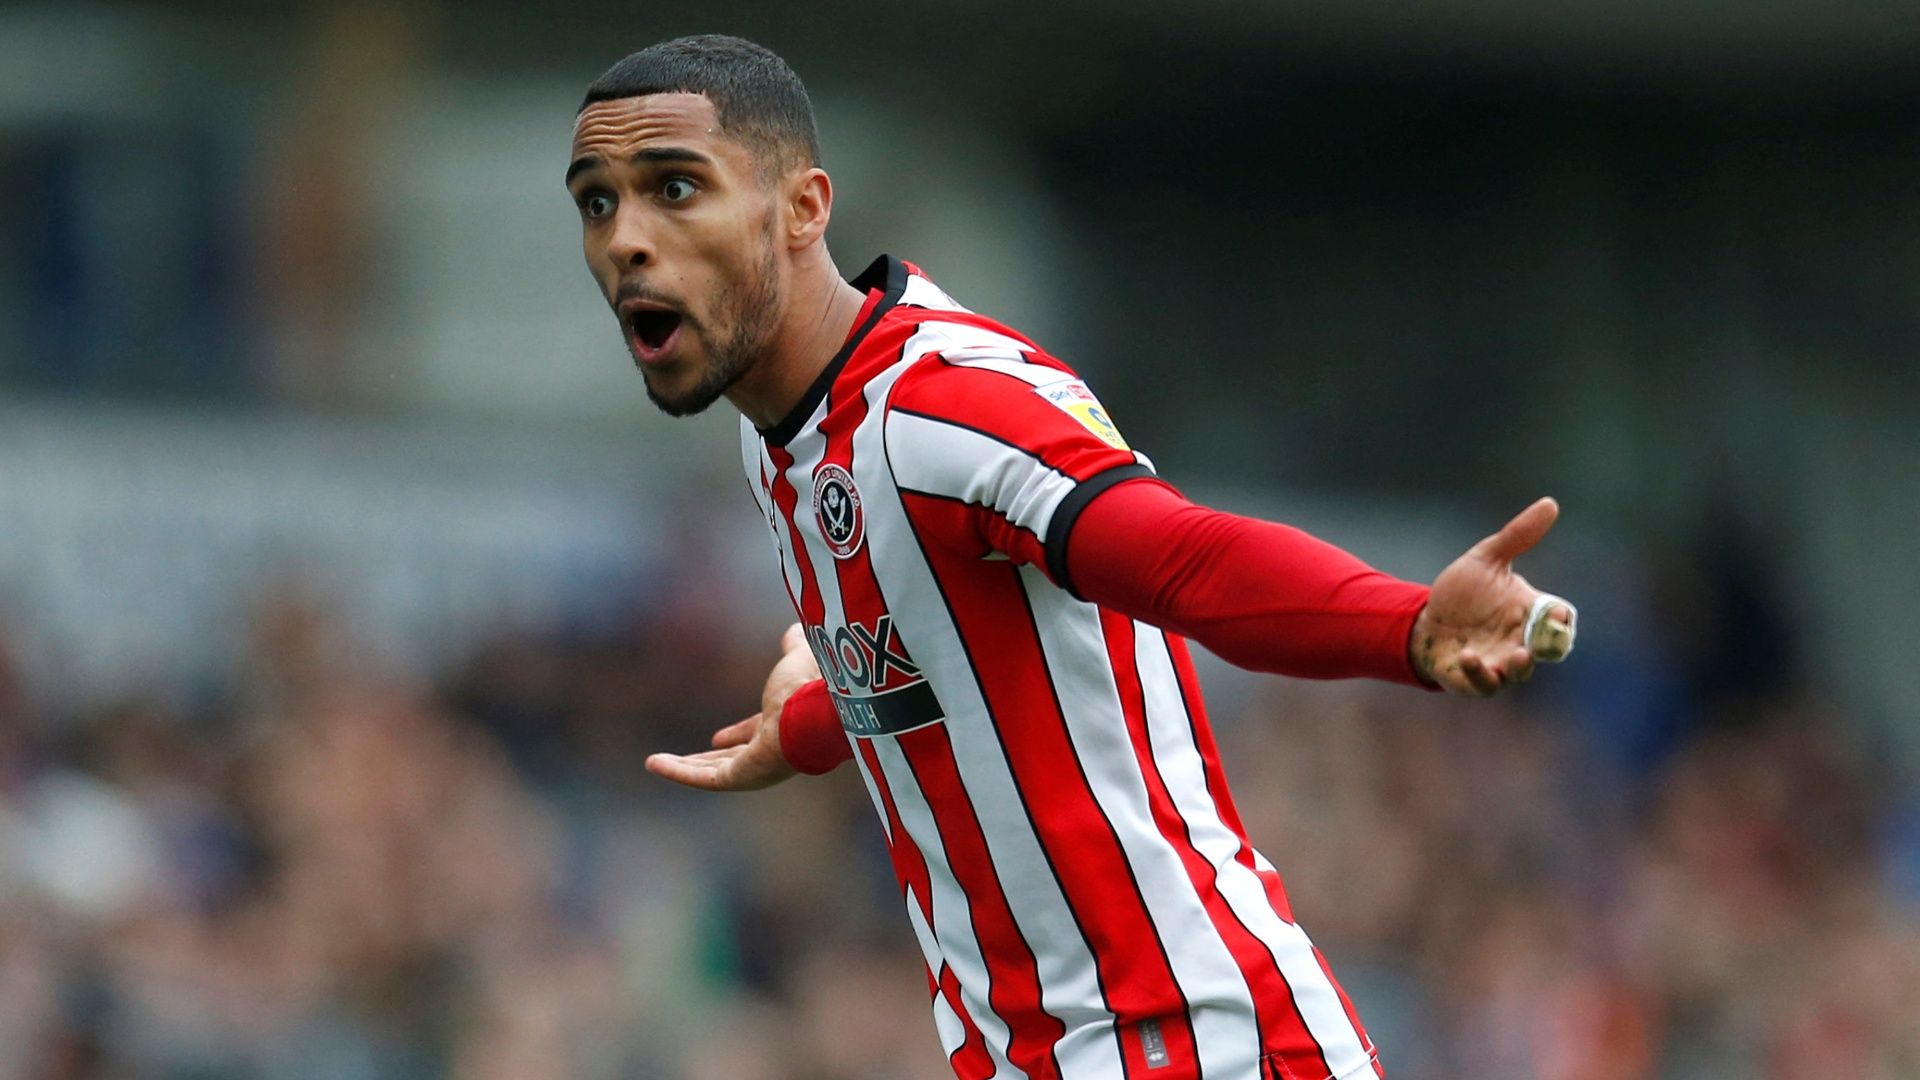 Championship clubs keen to sign Max Lowe from Sheffield United